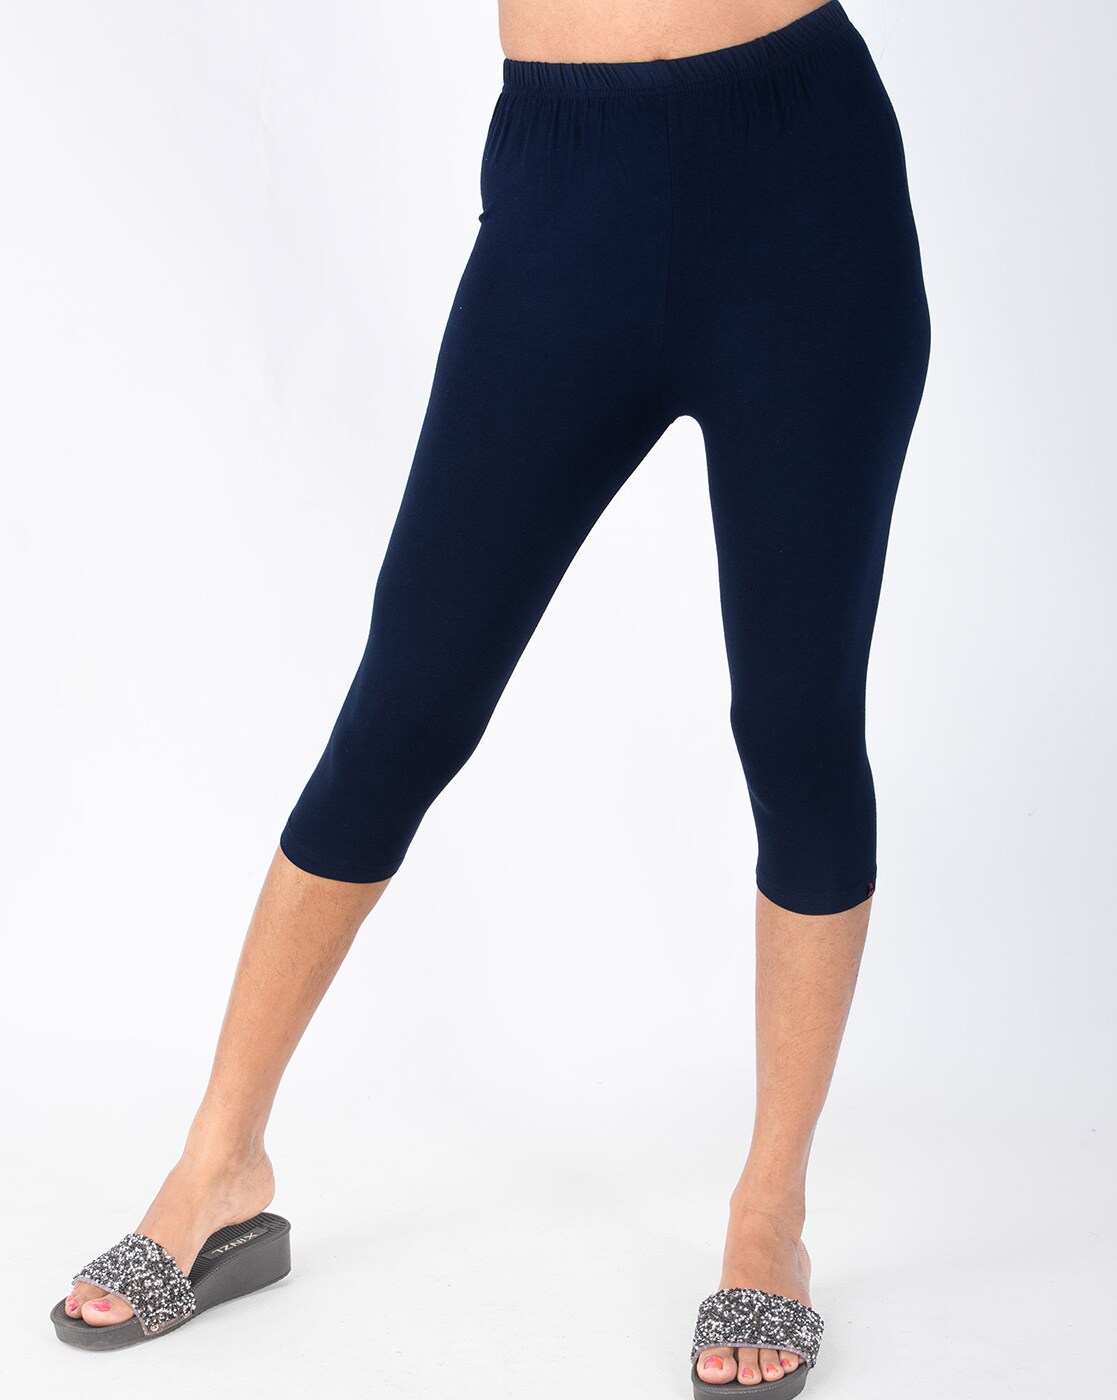 Buy Black Seamfree Shaping Mid Length Leggings from Next Luxembourg-cheohanoi.vn